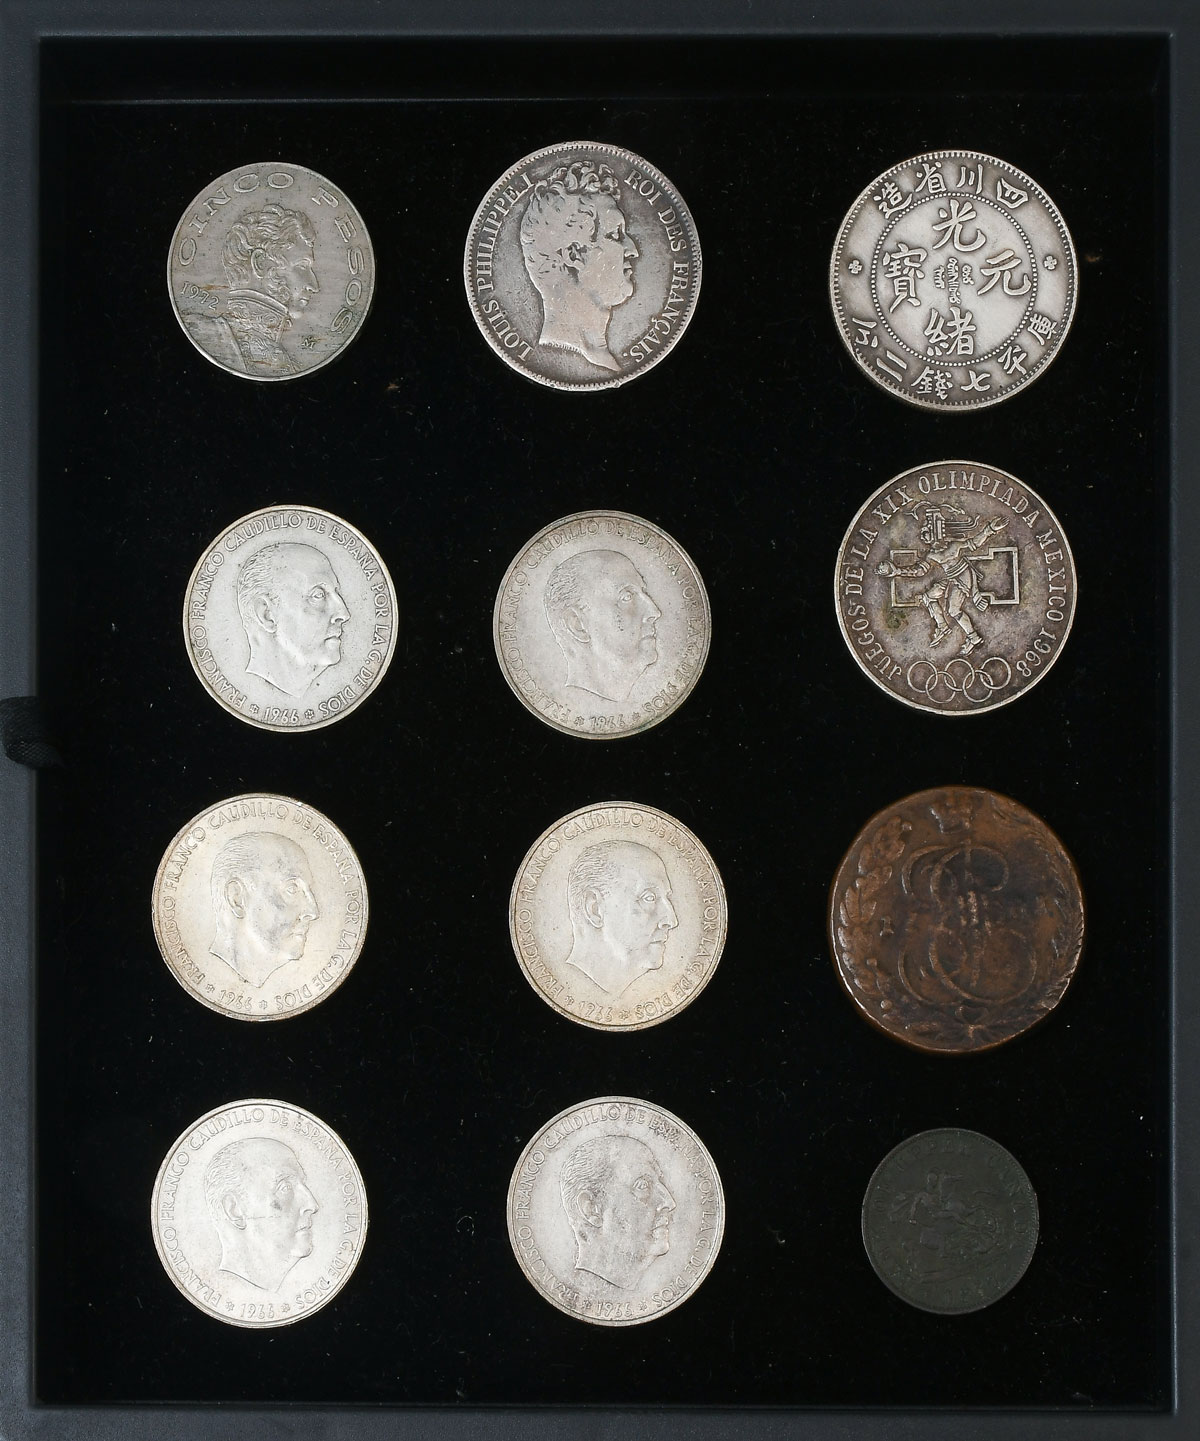 12 PC WORLDLY COIN COLLECTION  275a5c